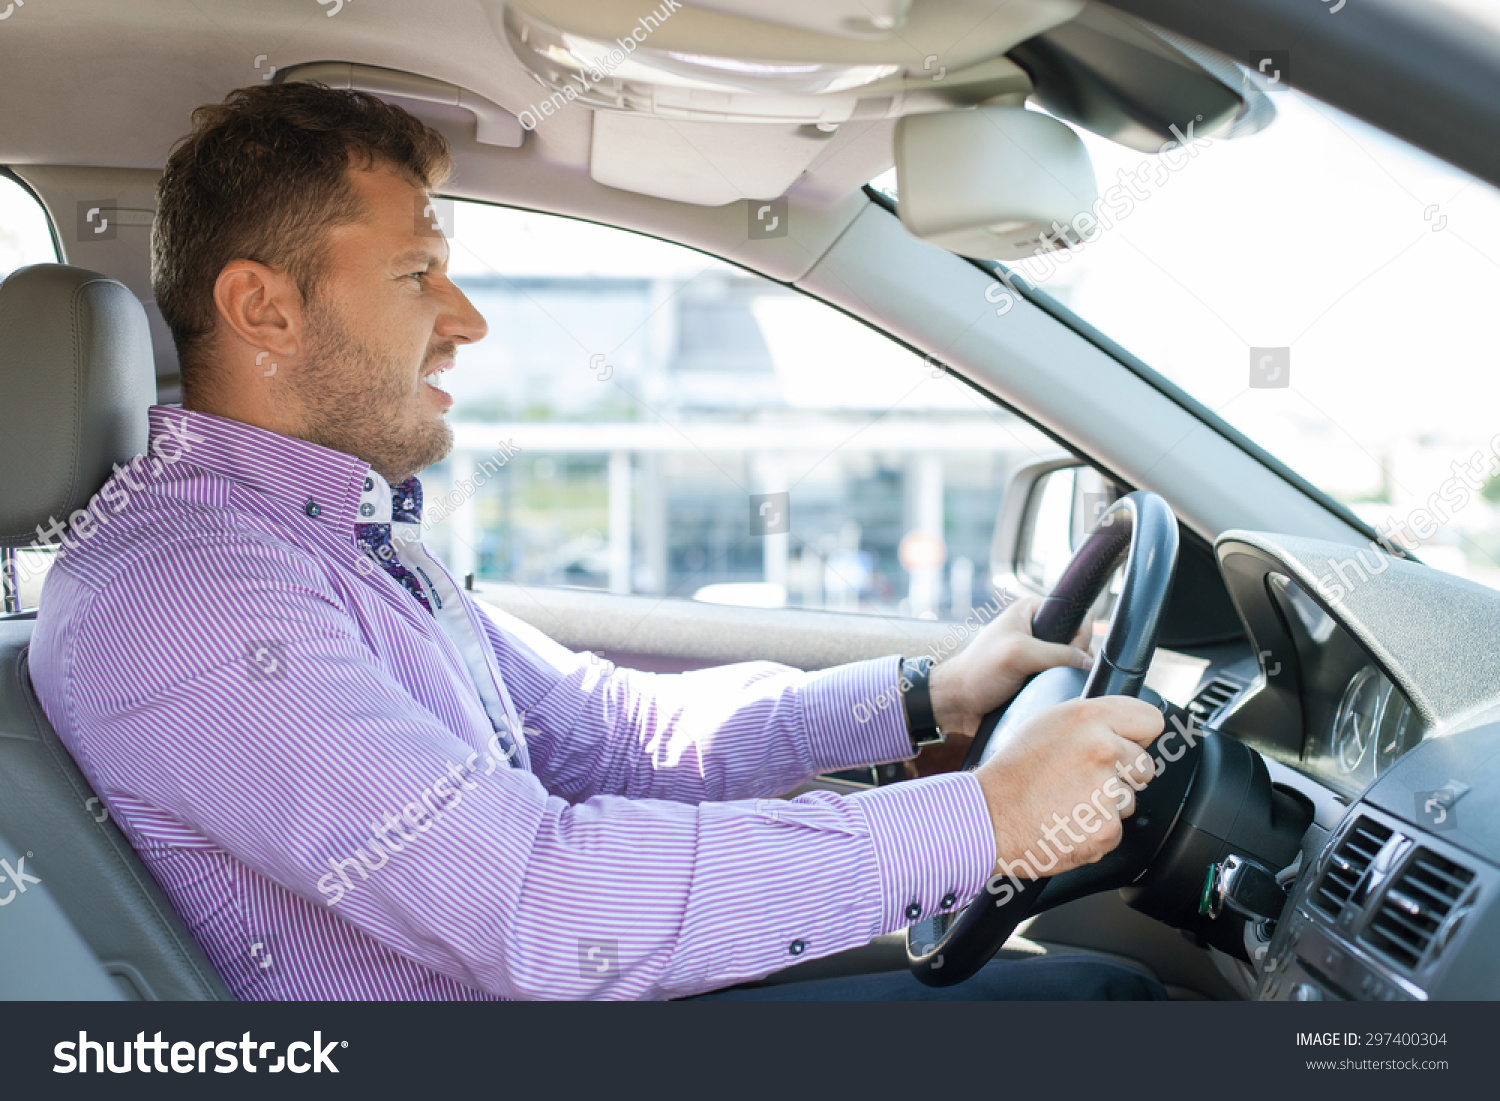 Young well-dressed man is driving his car with passion. He is looking forward with aggression #297400304